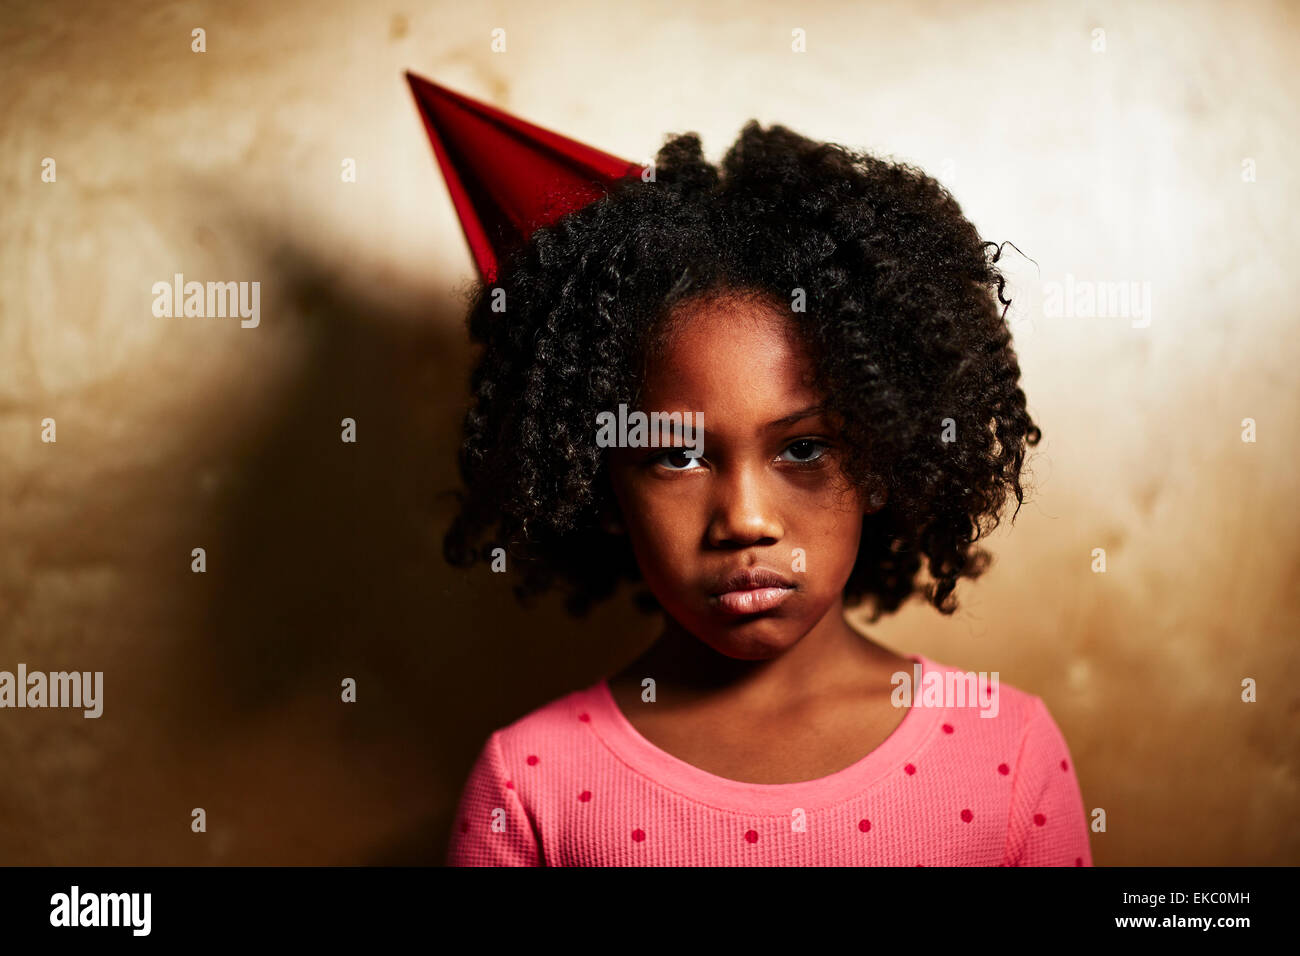 Sad girl wearing party hat Banque D'Images